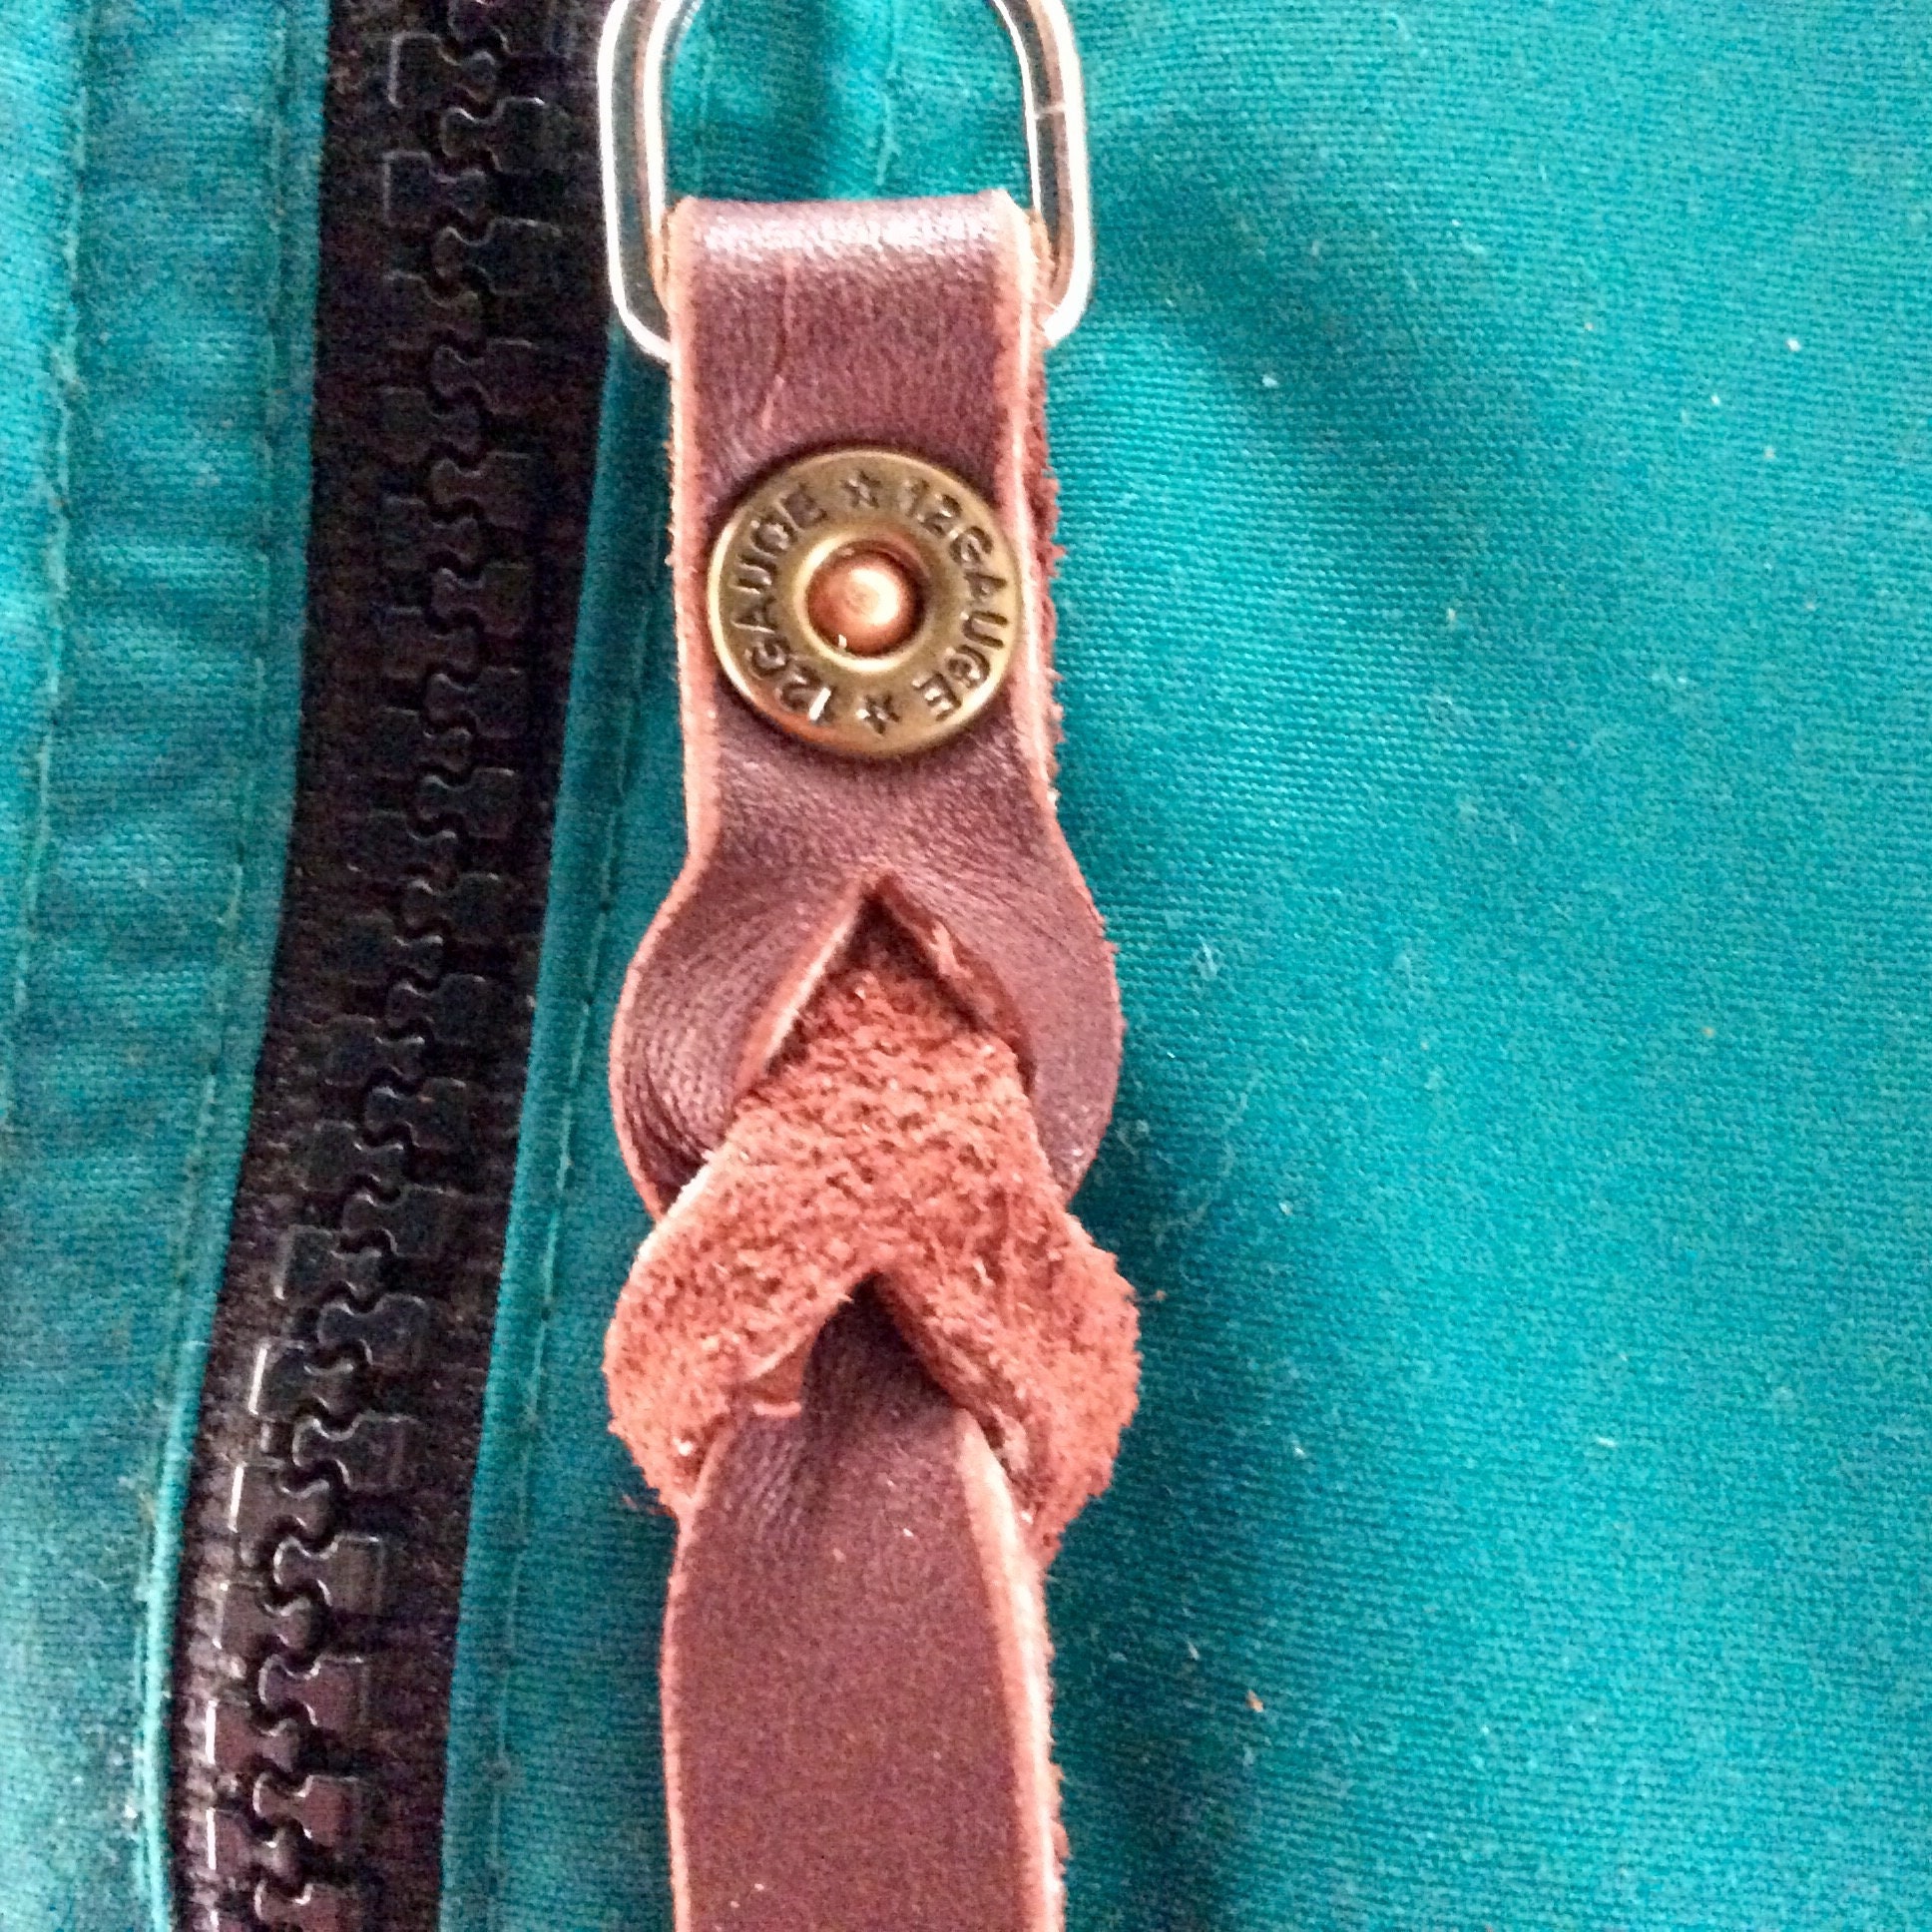 Leather Zipper Pull, Zipper Pull With 12 Gauge Rivet,purse Zipper Pull,  Coat Zipper Pull, Jacket Zipper Pull, Zipper Pull Tab, Handmade Pull 